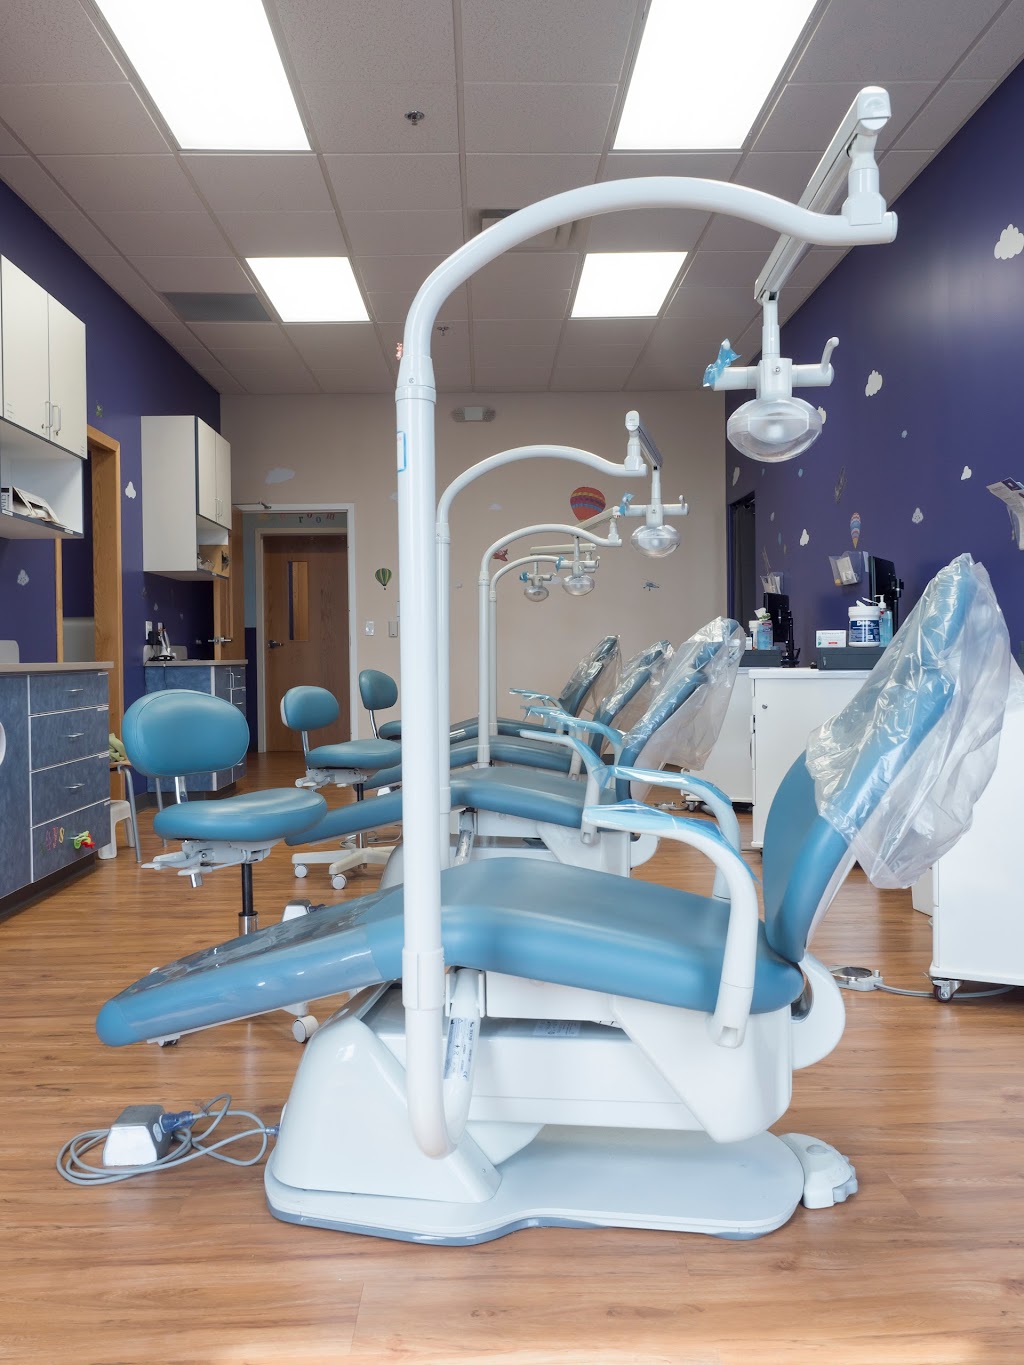 Smiles 4 Keeps Pediatric Dentistry - Bartonsville | 3565 PA-611 Suite 300, Bartonsville, PA 18321 | Phone: (570) 629-1142